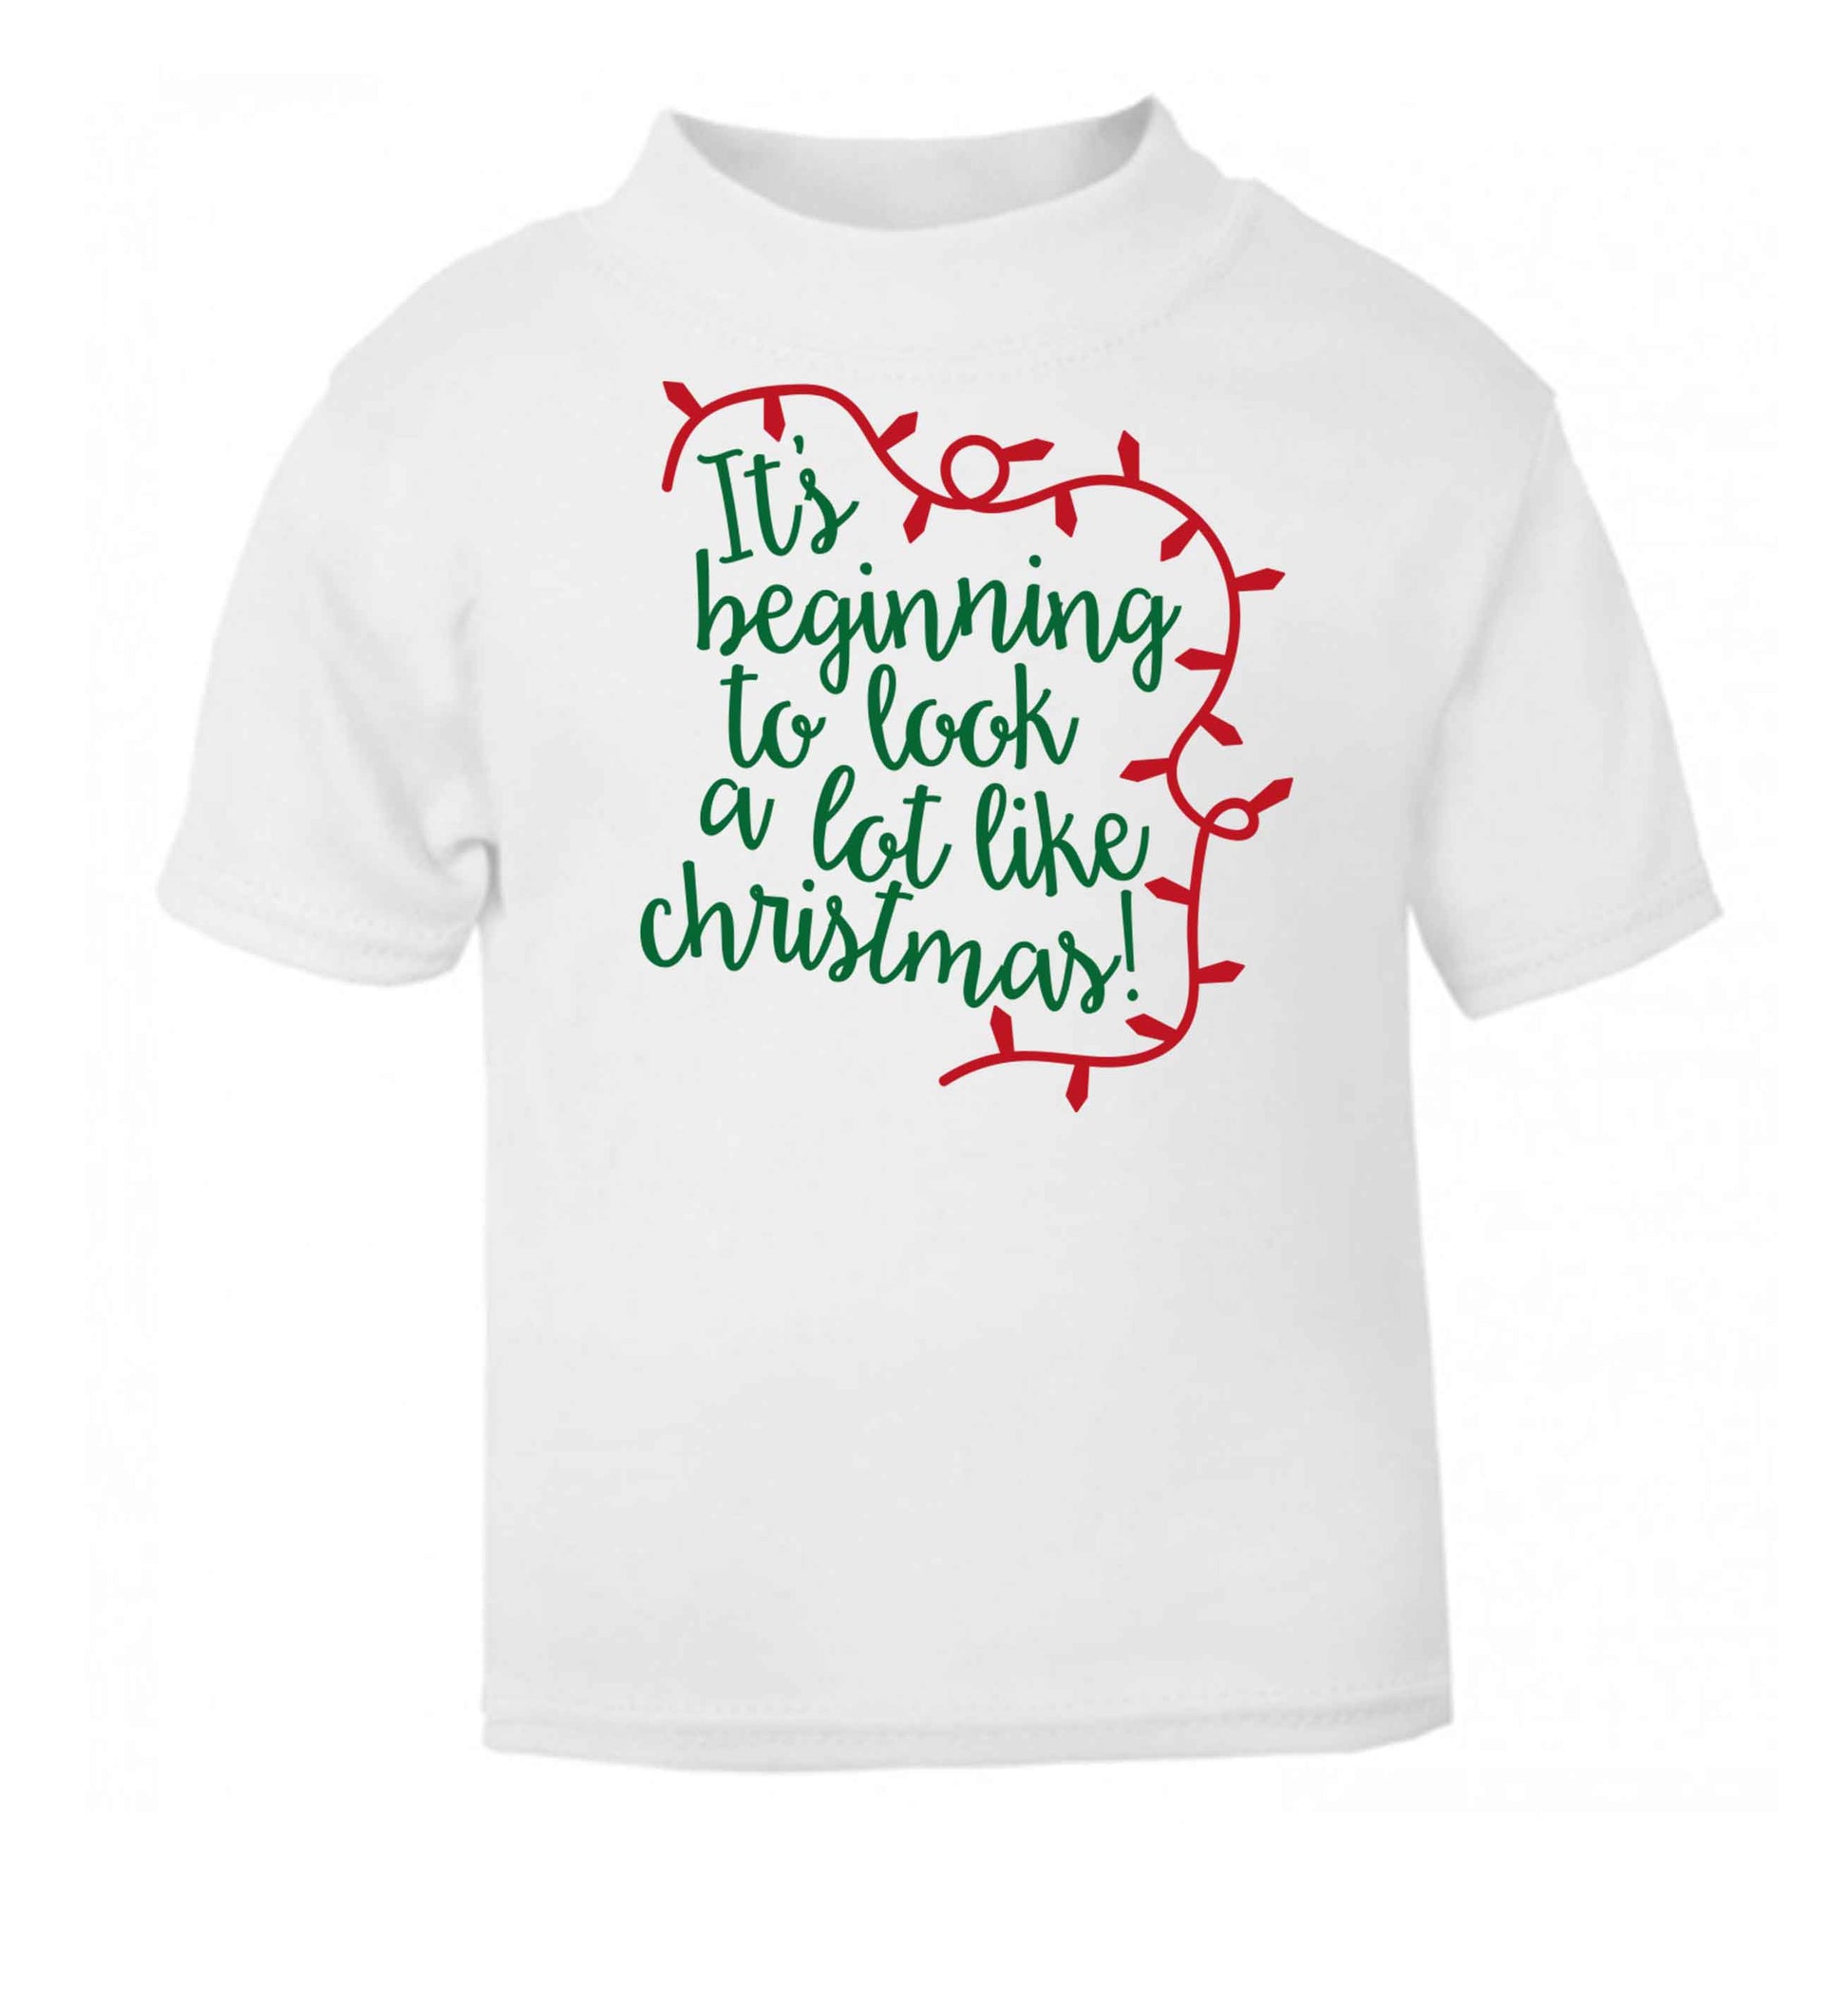 It's beginning to look a lot like Christmas white baby toddler Tshirt 2 Years